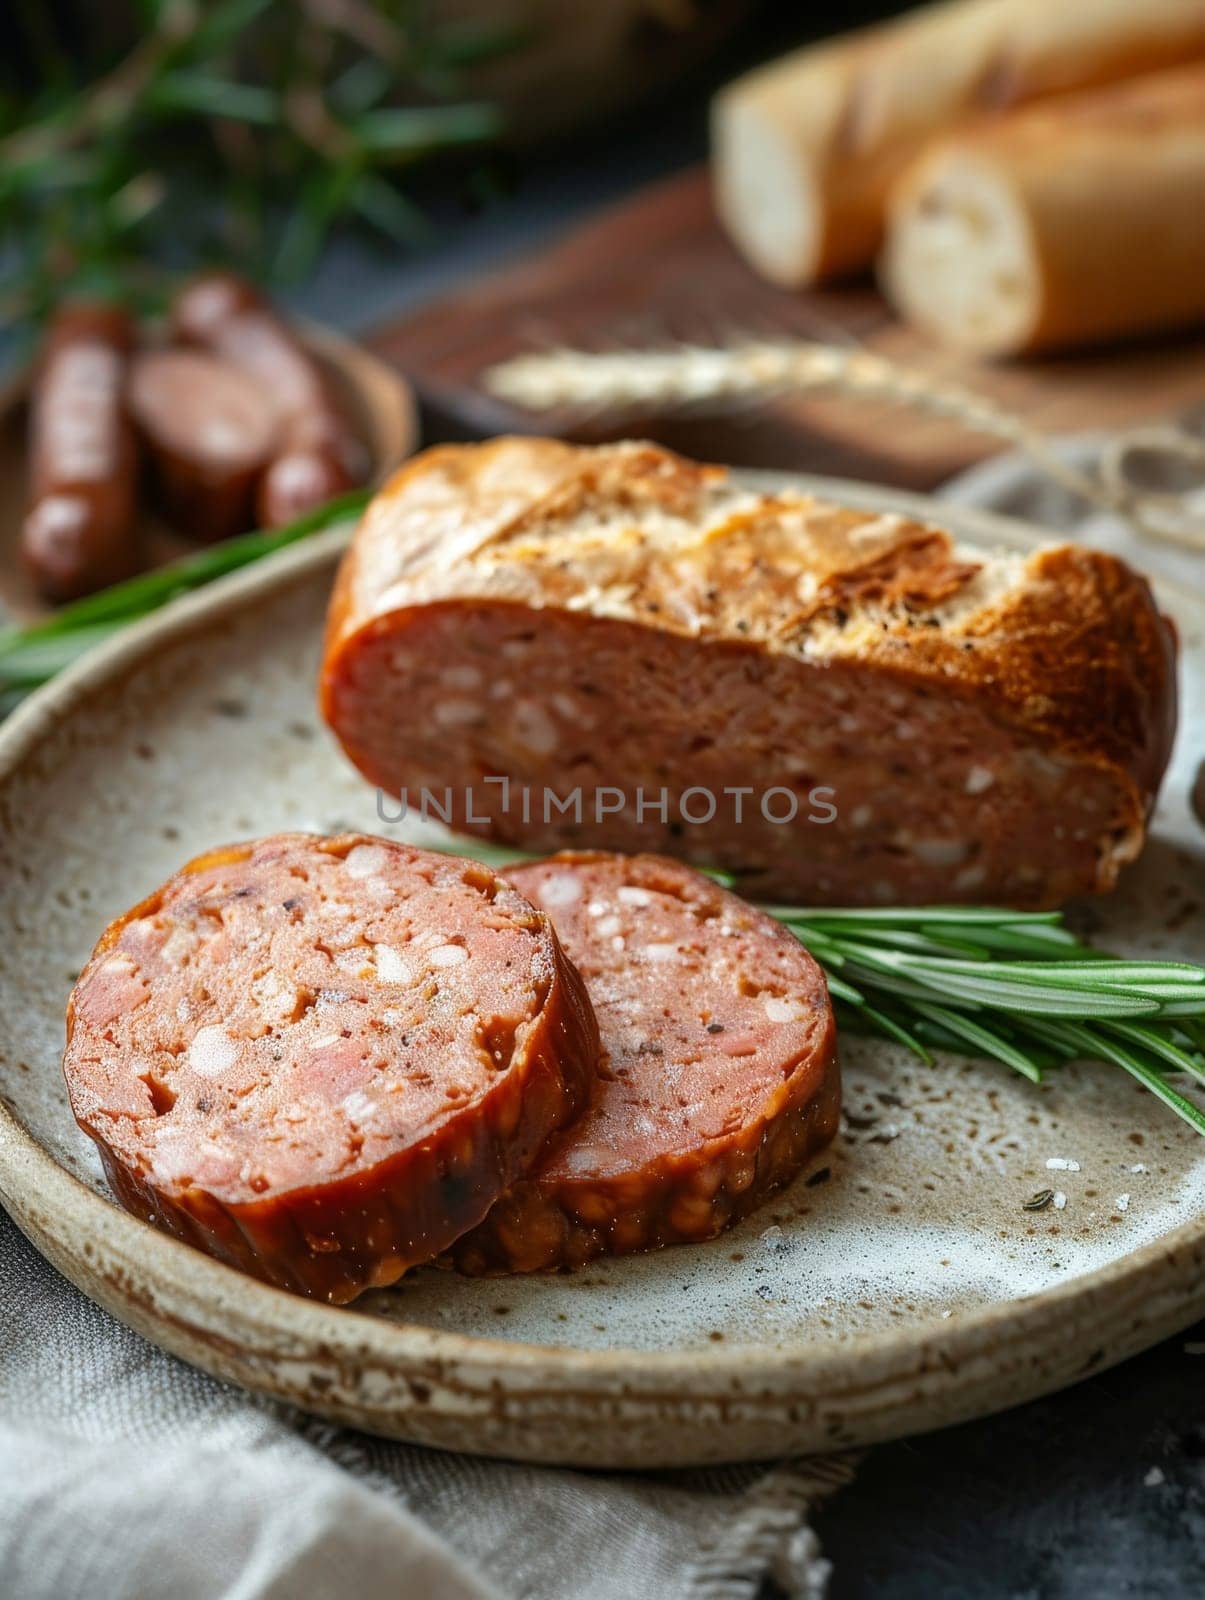 A succulent stuffed meatloaf served on a rustic wooden board, garnished with fresh herbs, ready for a delicious meal